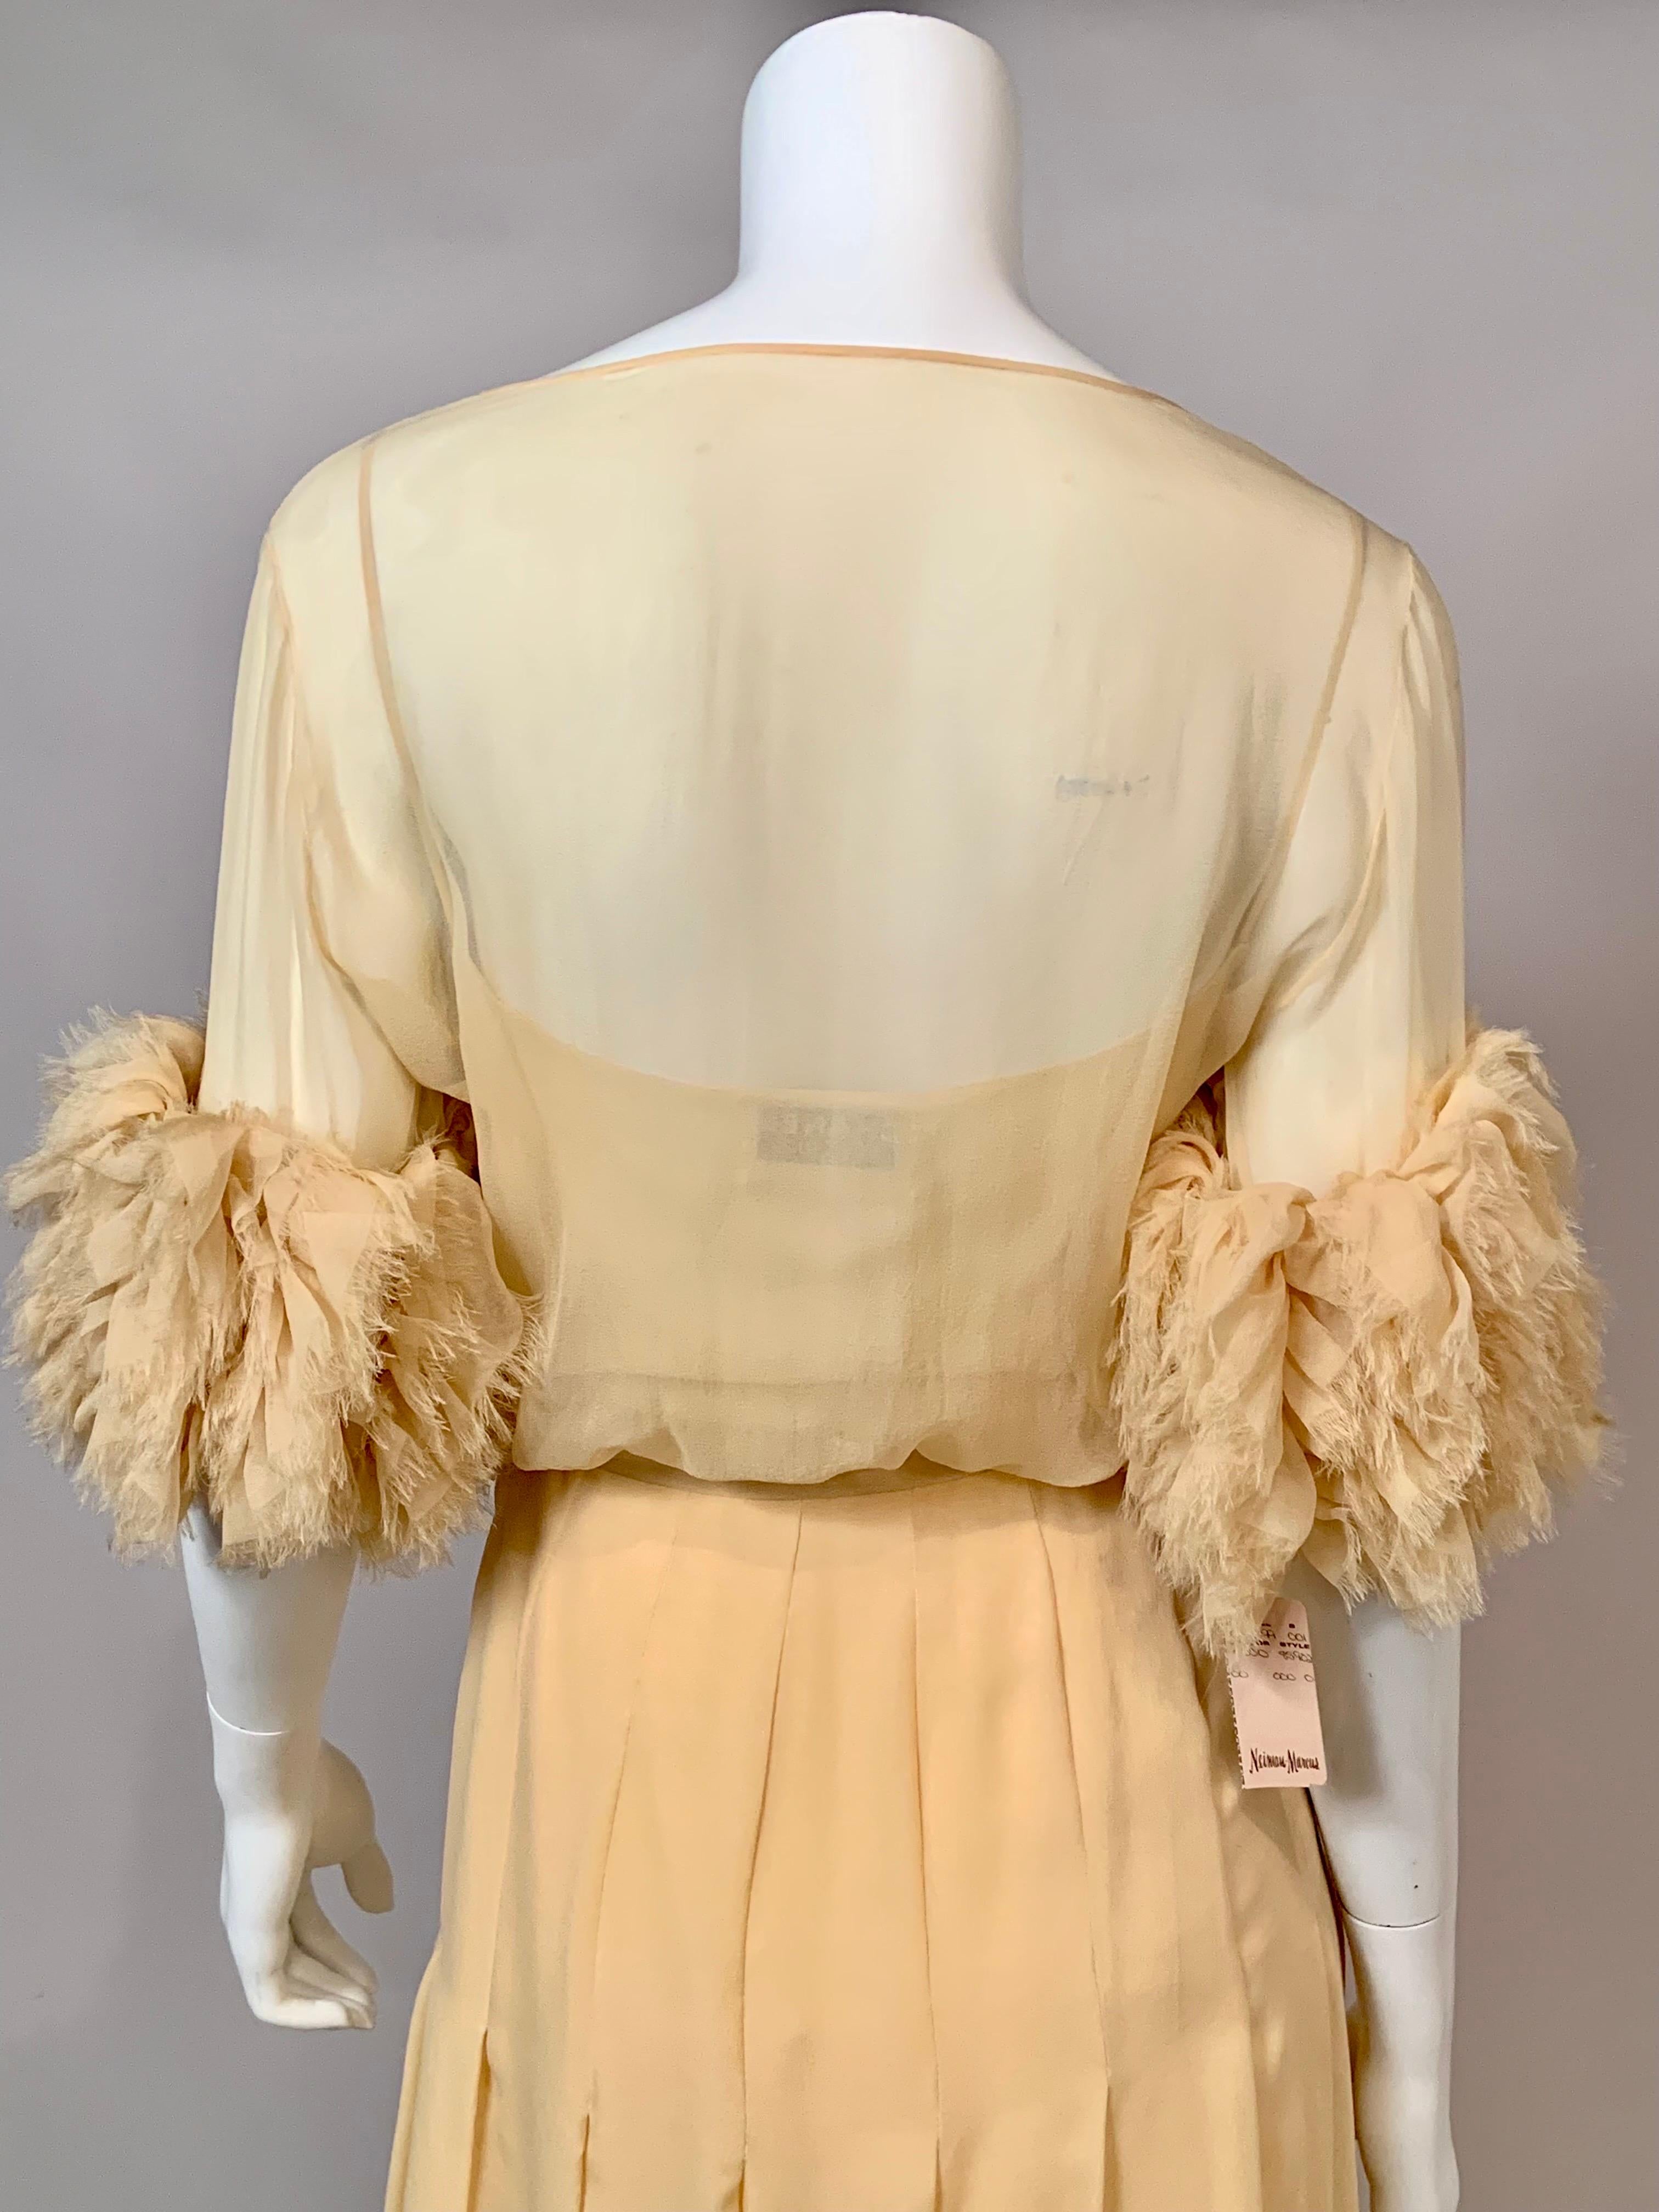 1984 Chanel by Karl Lagerfeld Butter Yellow Silk Chiffon Evening Gown Never Worn 7